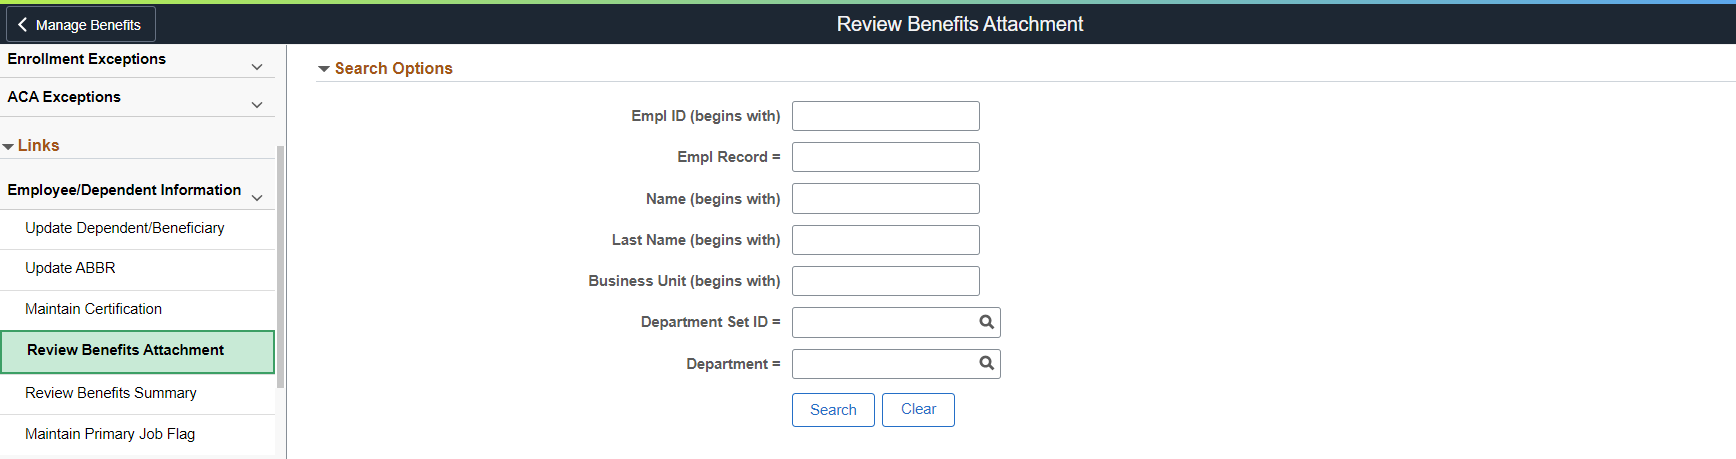 Review Benefits Attachment Page